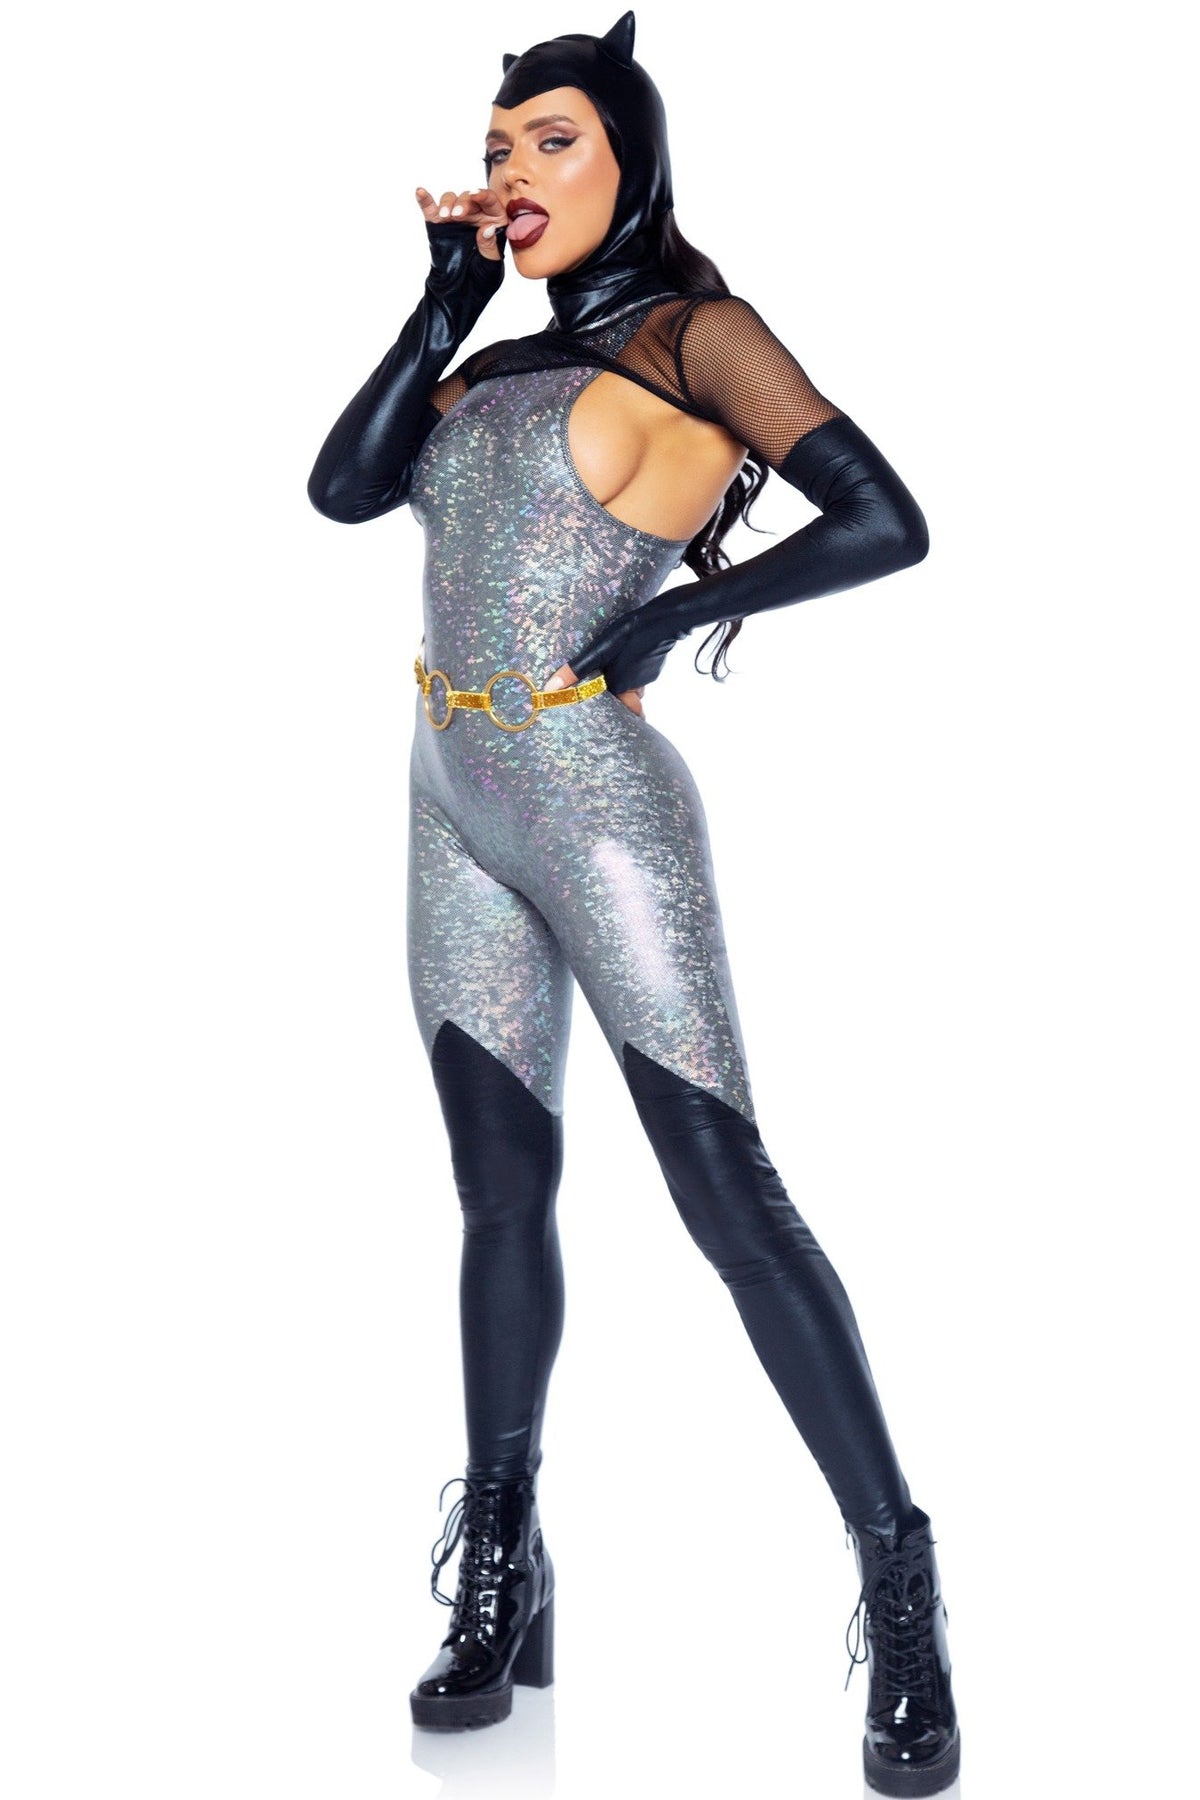 Model wearing black and silver retro catwoman catsuit costume